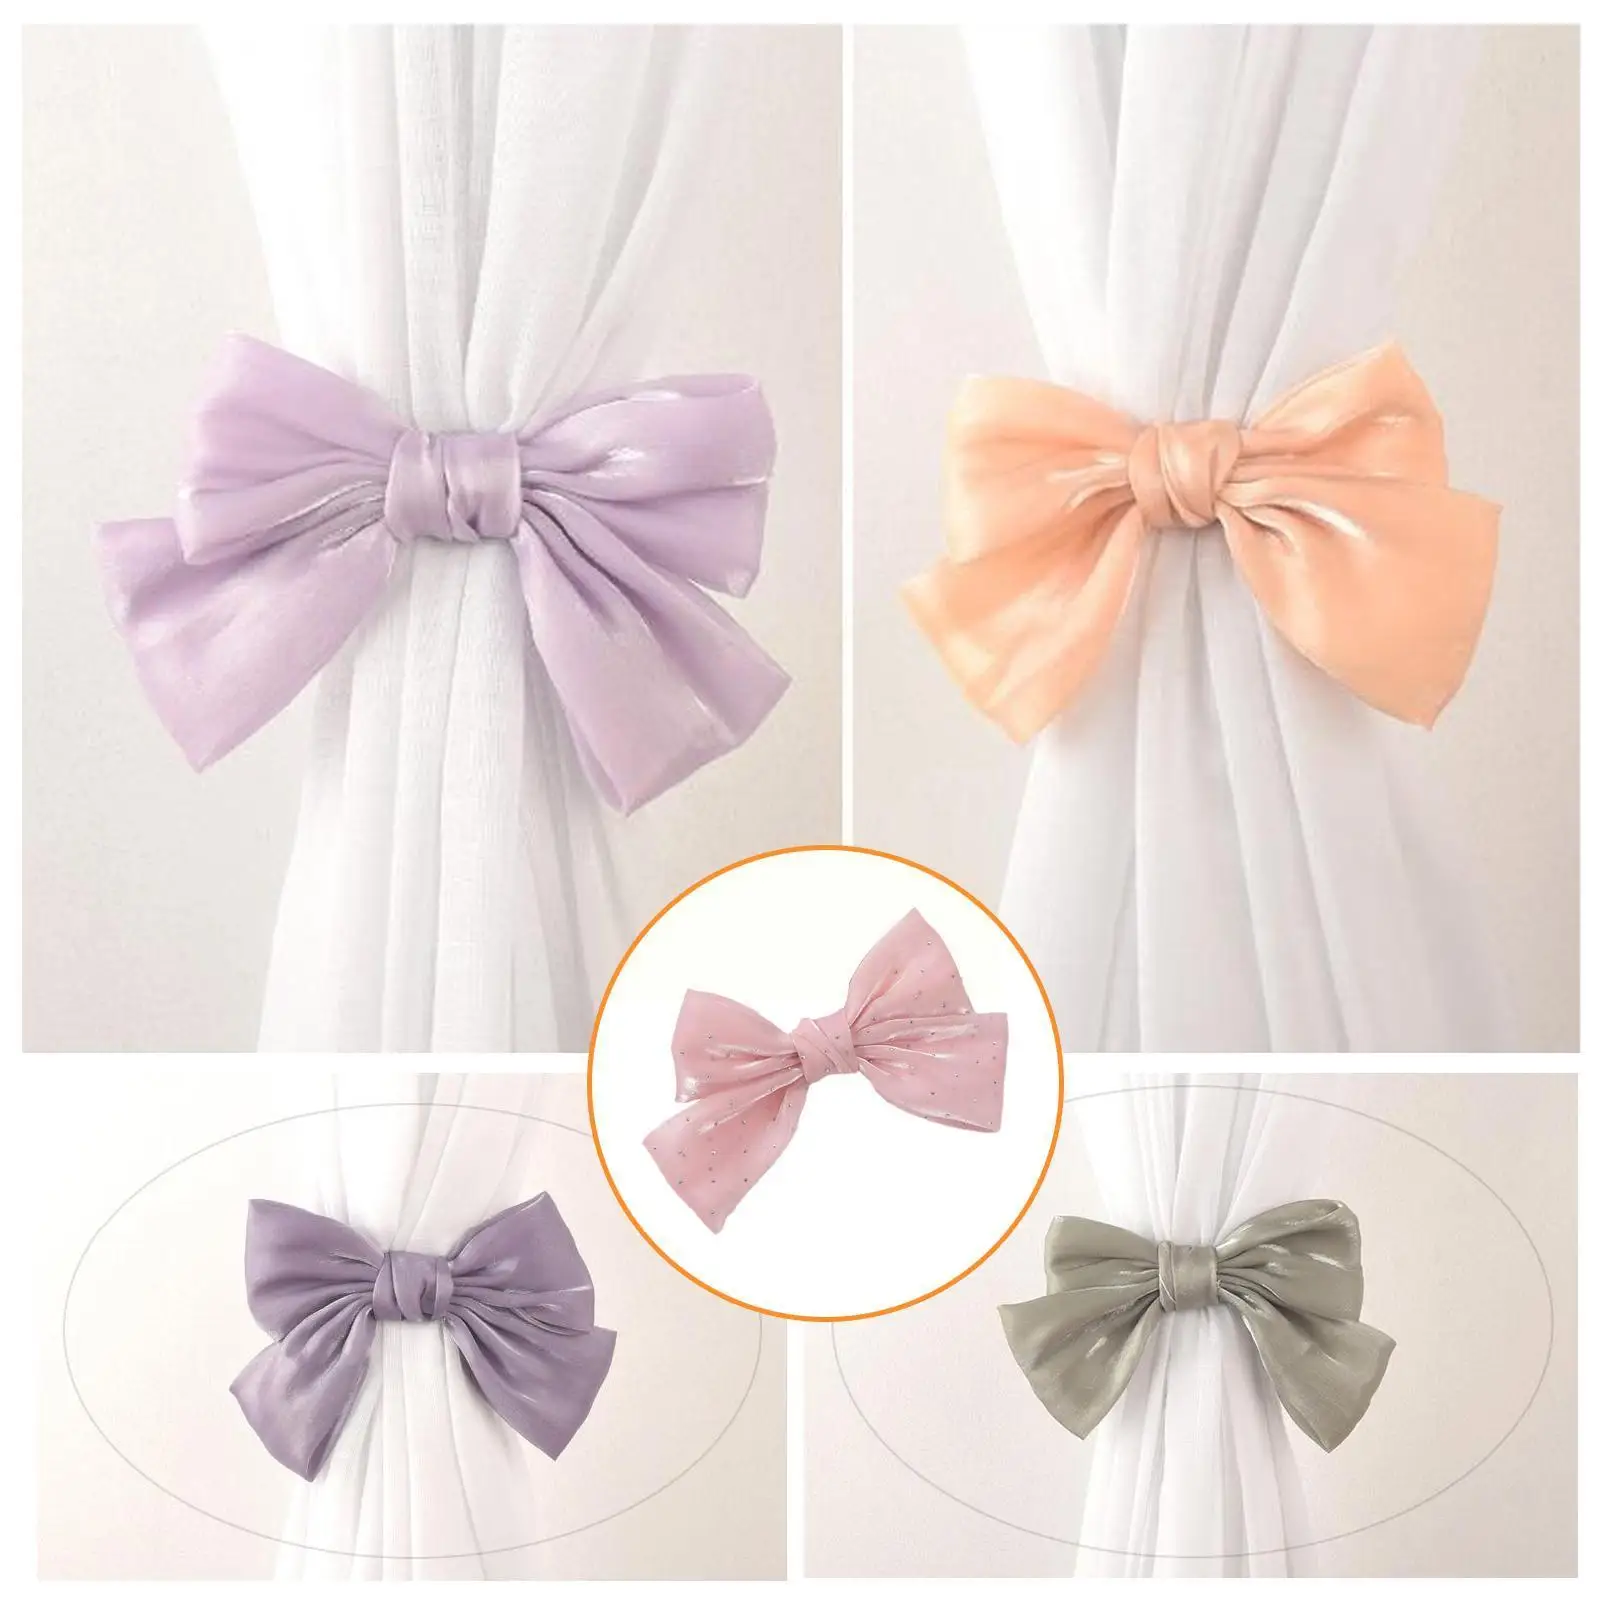 Curtain Bowknot Buckle Clip Chiffon Strap Hanging Curtain Decor Home Holders Curtains Tieback Clips Accessories Bow Beads R4C5